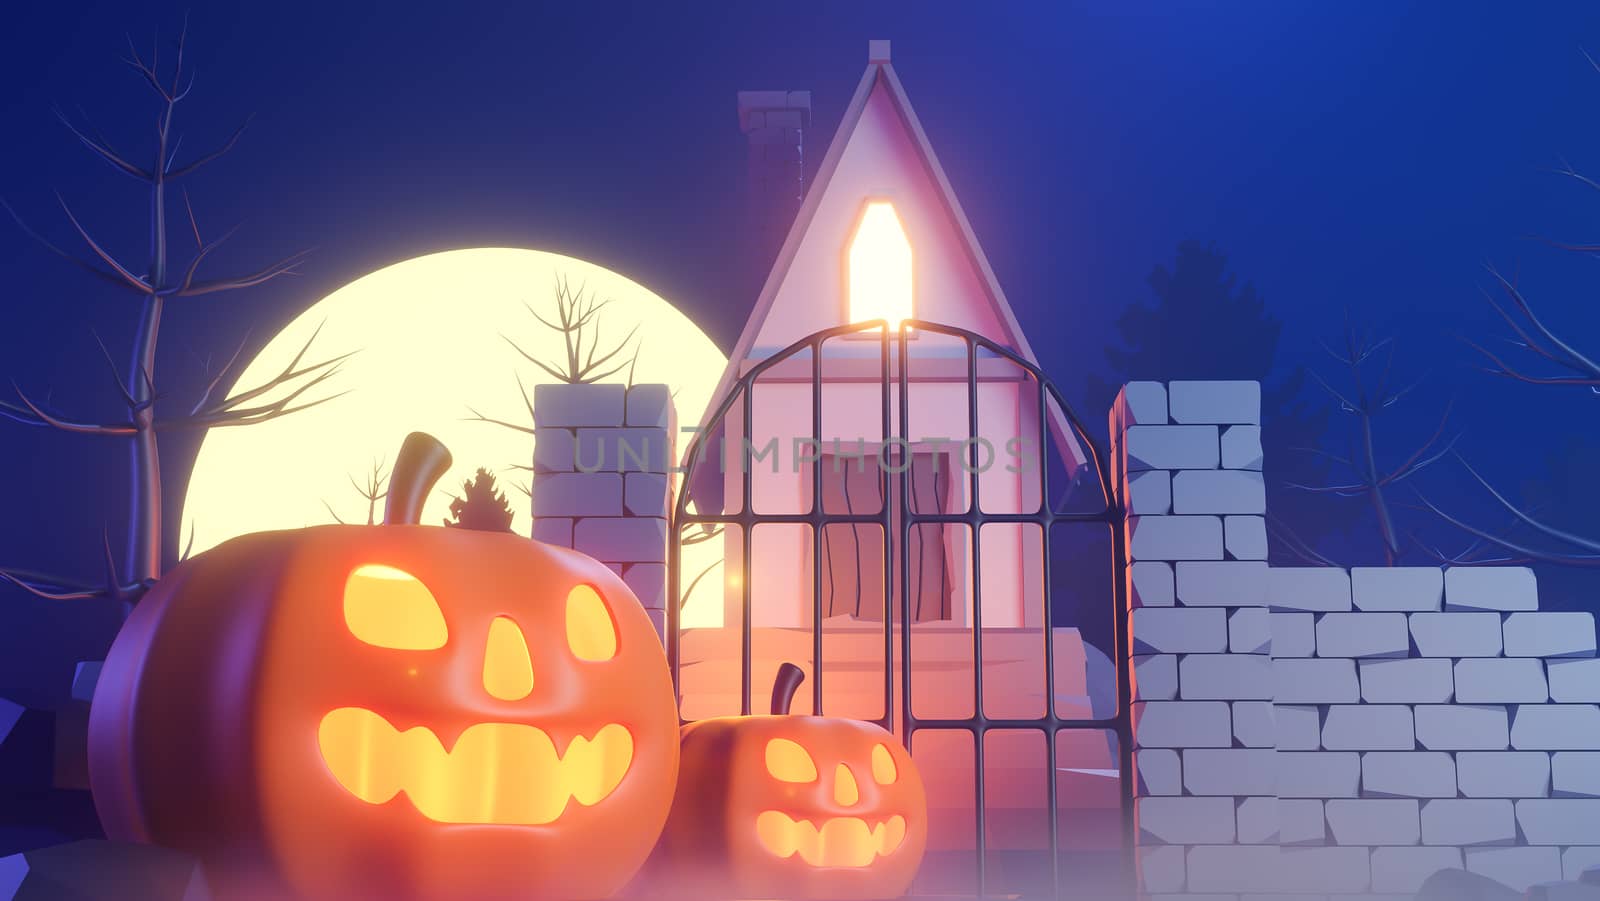 halloween theme with pumpkins and a house at night.,3d model and illustration. by anotestocker